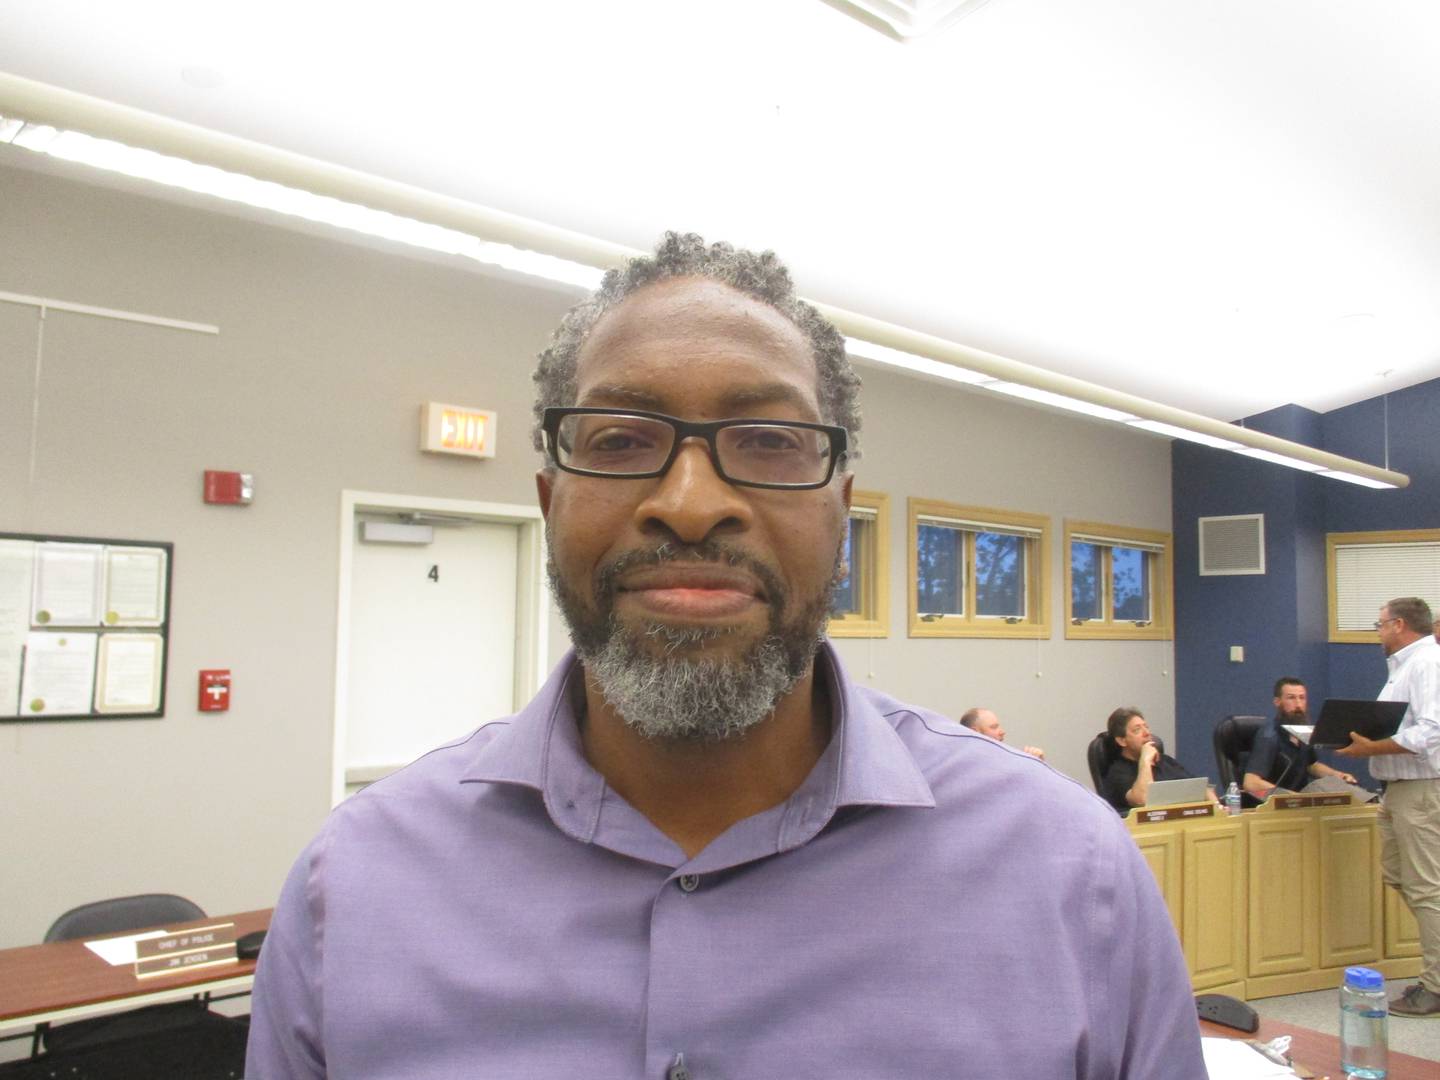 Plano Alderman Jamal Williams is encouraging residents to enjoy Plano's second annual Juneteenth celebration on Father's Day. (Mark Foster -- mfoster@shawmedia.com)